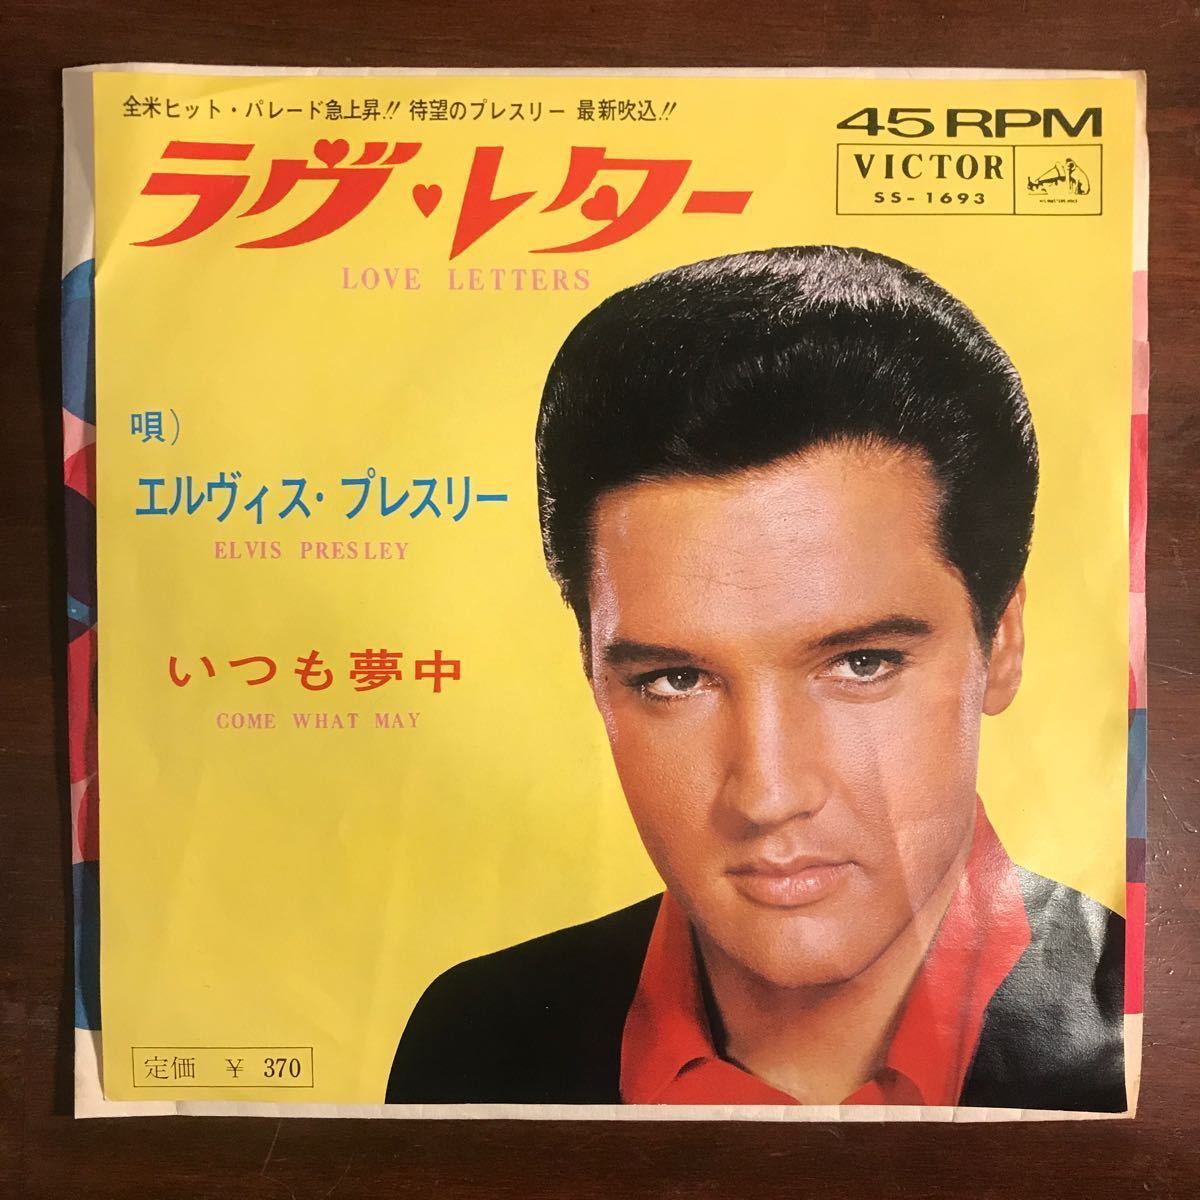 【EP】エルヴィス・プレスリー Elvis Presley / ラヴ・レター Love Letters いつも夢中 Come What May／ss-1393_画像1